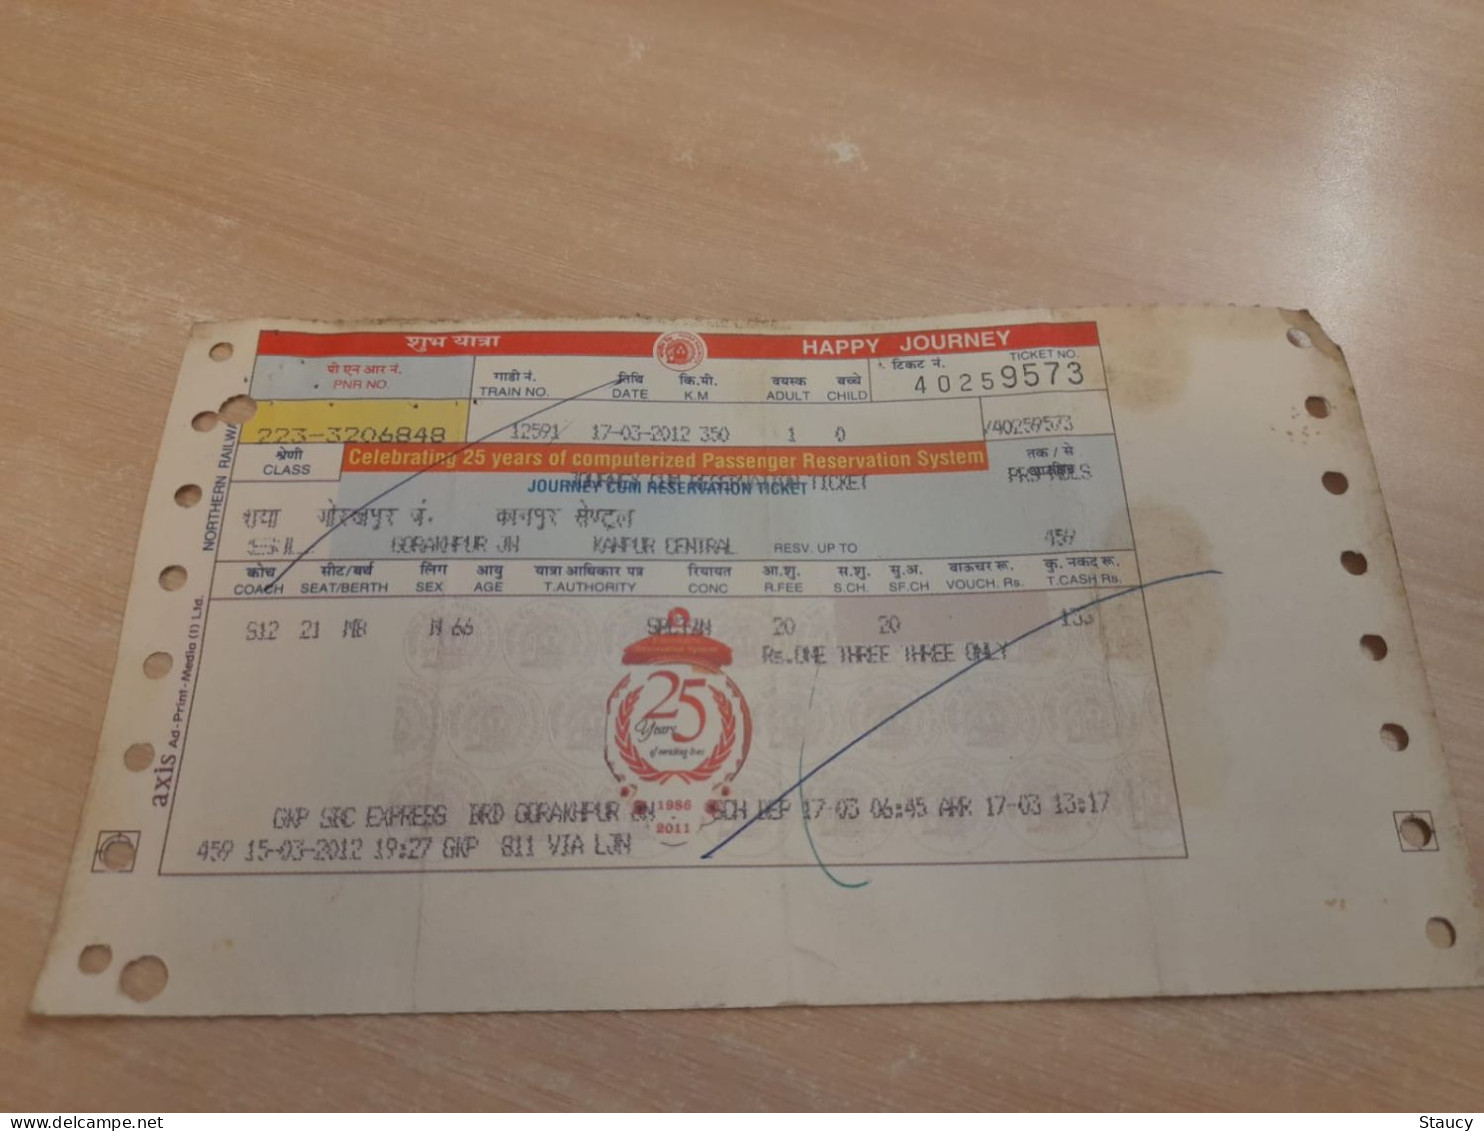 India Old / Vintage - Railway / Train Special Ticket "NORTHERN RAILWAY" Celebrating 25 Years Of C.P.R.System As Per Scan - Welt